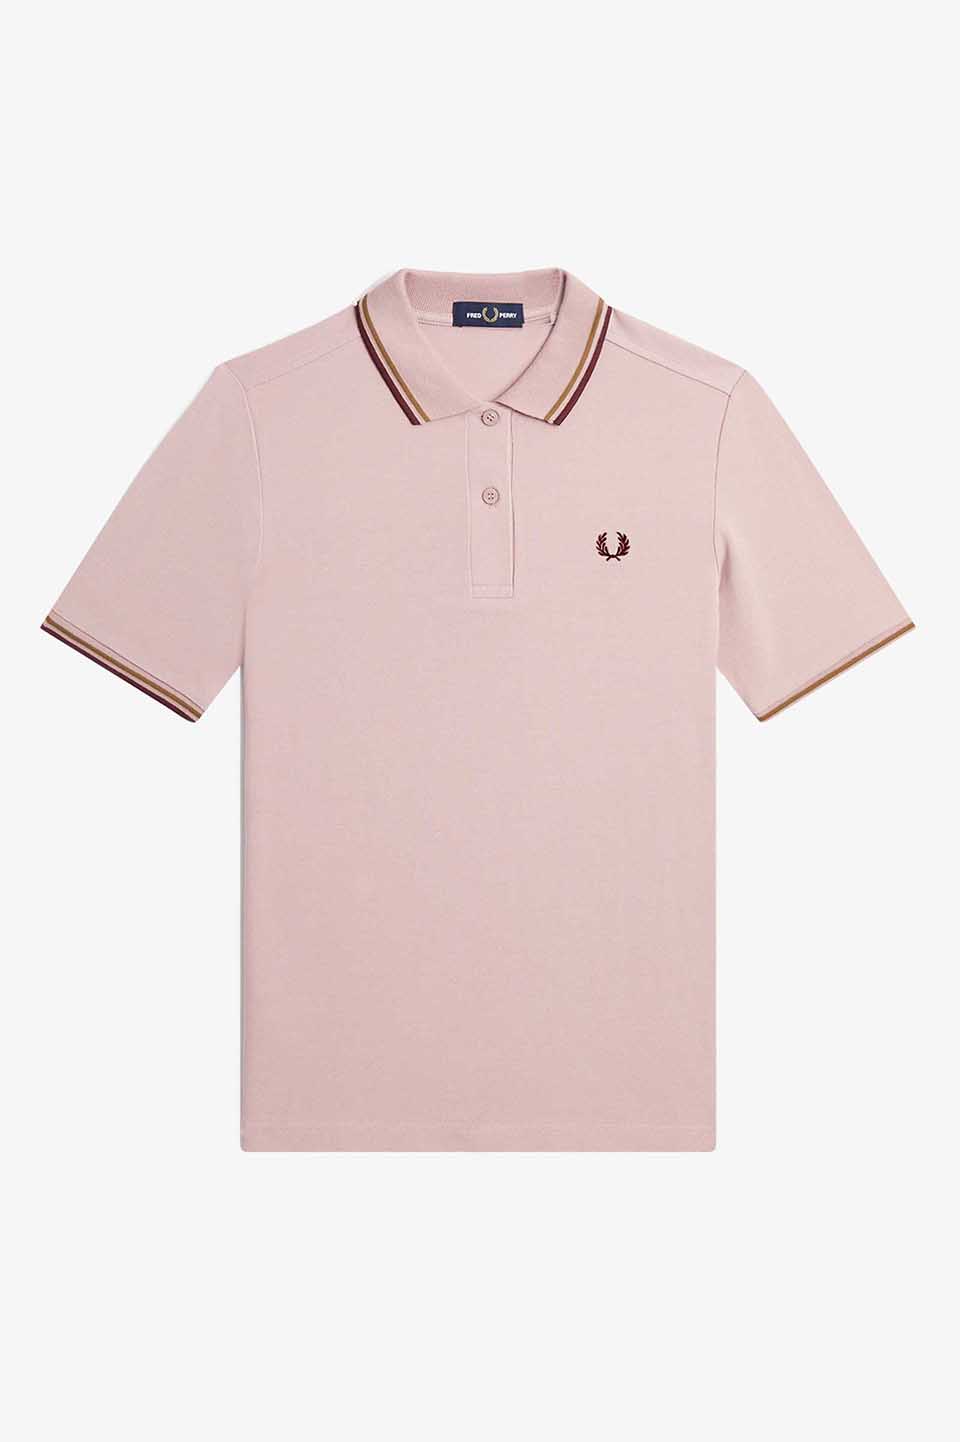 FRED PERRY / Twin Tipped ポロシャツ G3600 白 | hartwellspremium.com